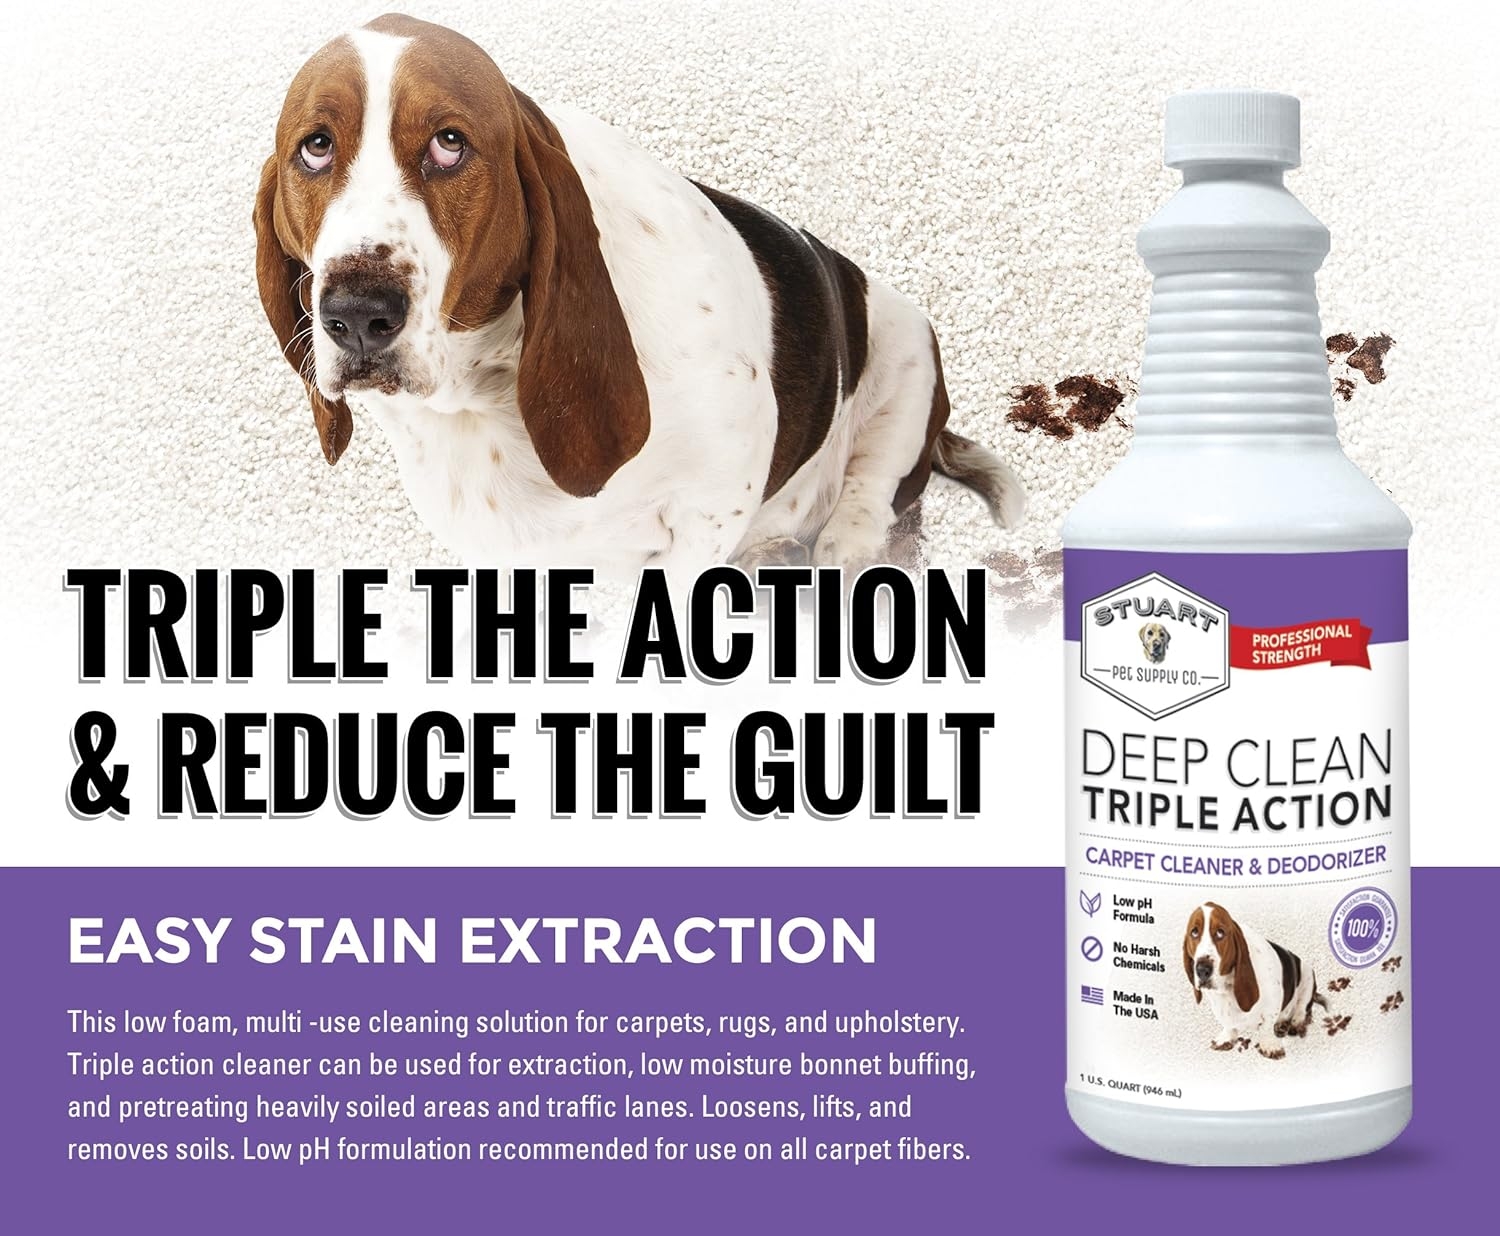 Stuart Pet Supply Co. Professional Strength Deep Clean (Gal.) 3X Carpet Cleaner Solution & Deodorizer | Concentrated Encapsulating Carpet Shampoo | Pet Stain,Odor & Dirty Carpet Cleaning Formula